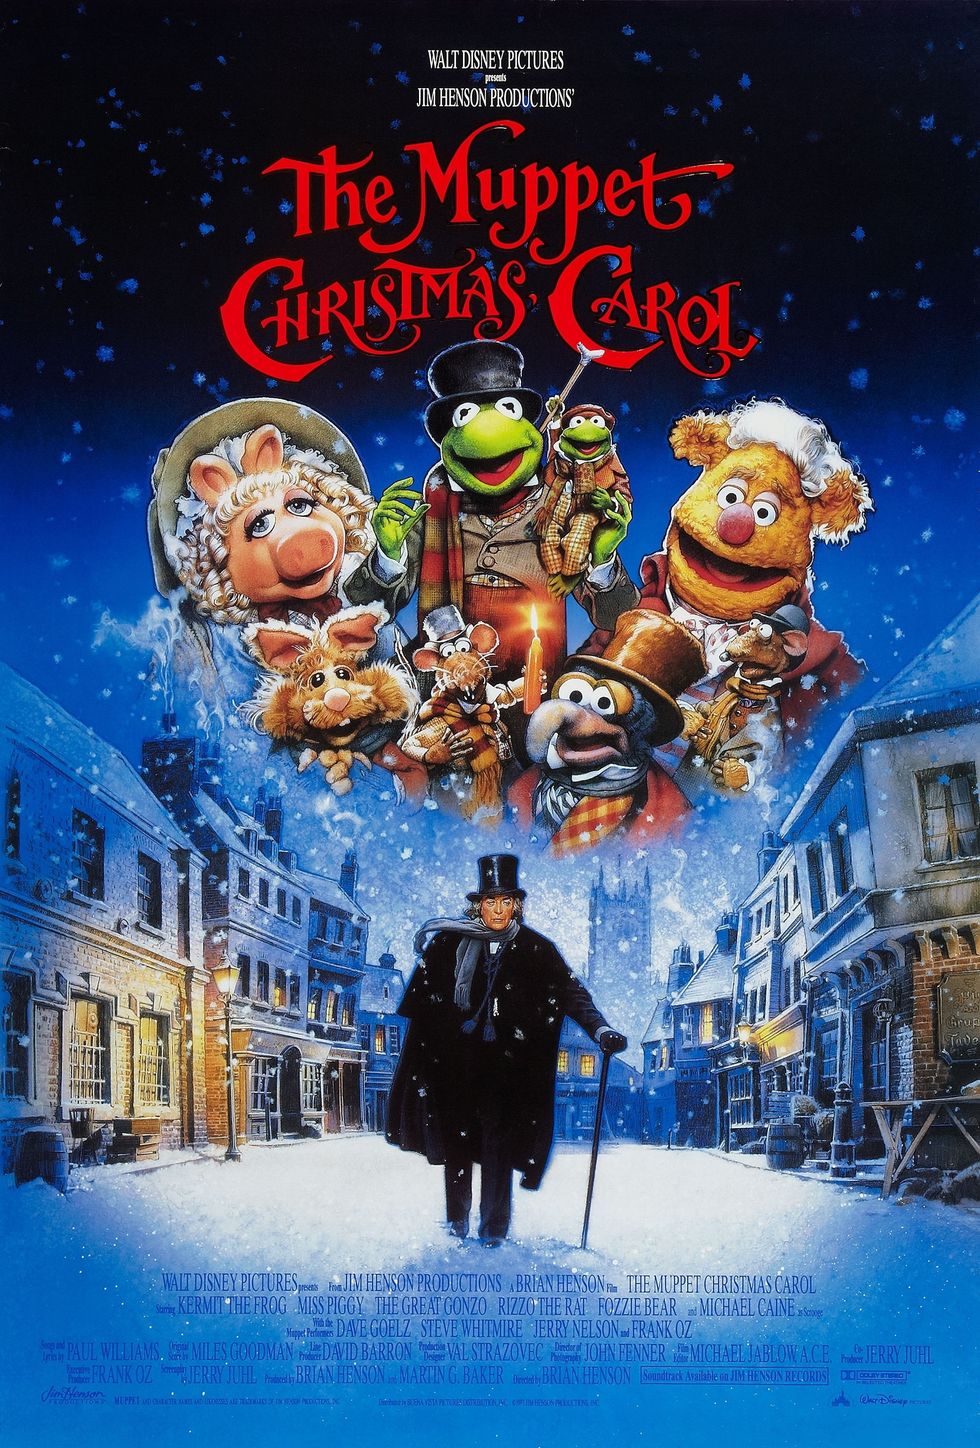 The Muppet Christmas Carol is the Greatest Christmas Movie Ever